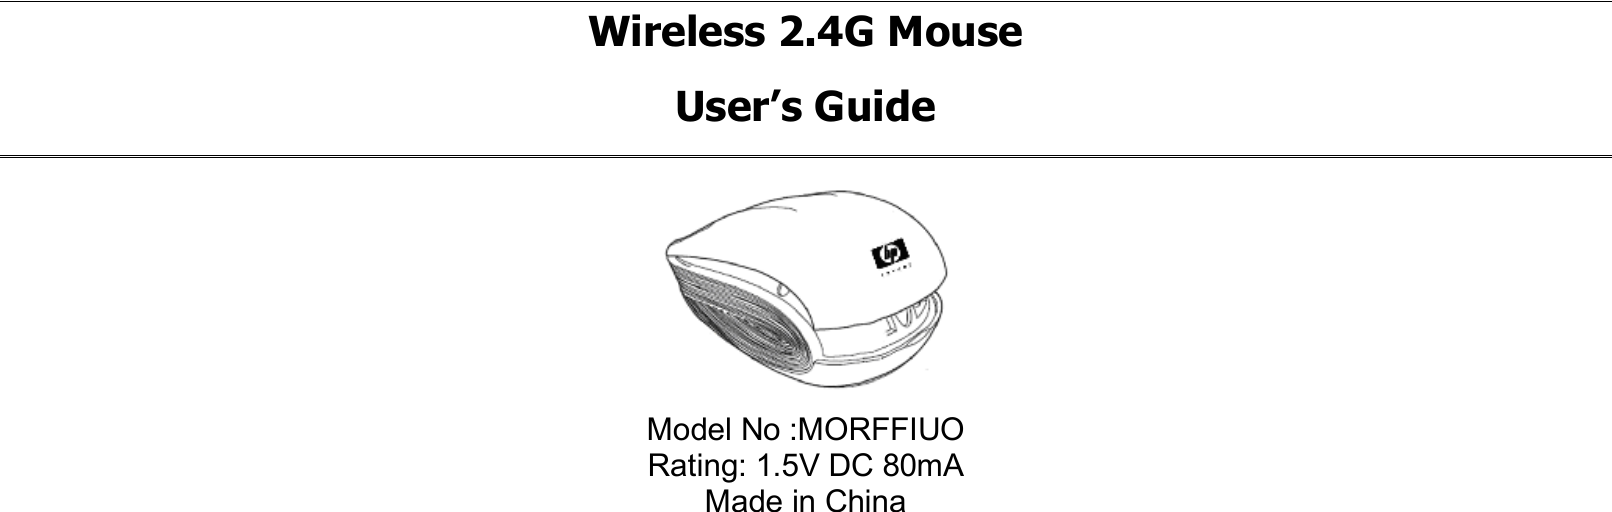 Wireless 2.4G Mouse User’s Guide   Model No :MORFFIUO Rating: 1.5V DC 80mA Made in China 